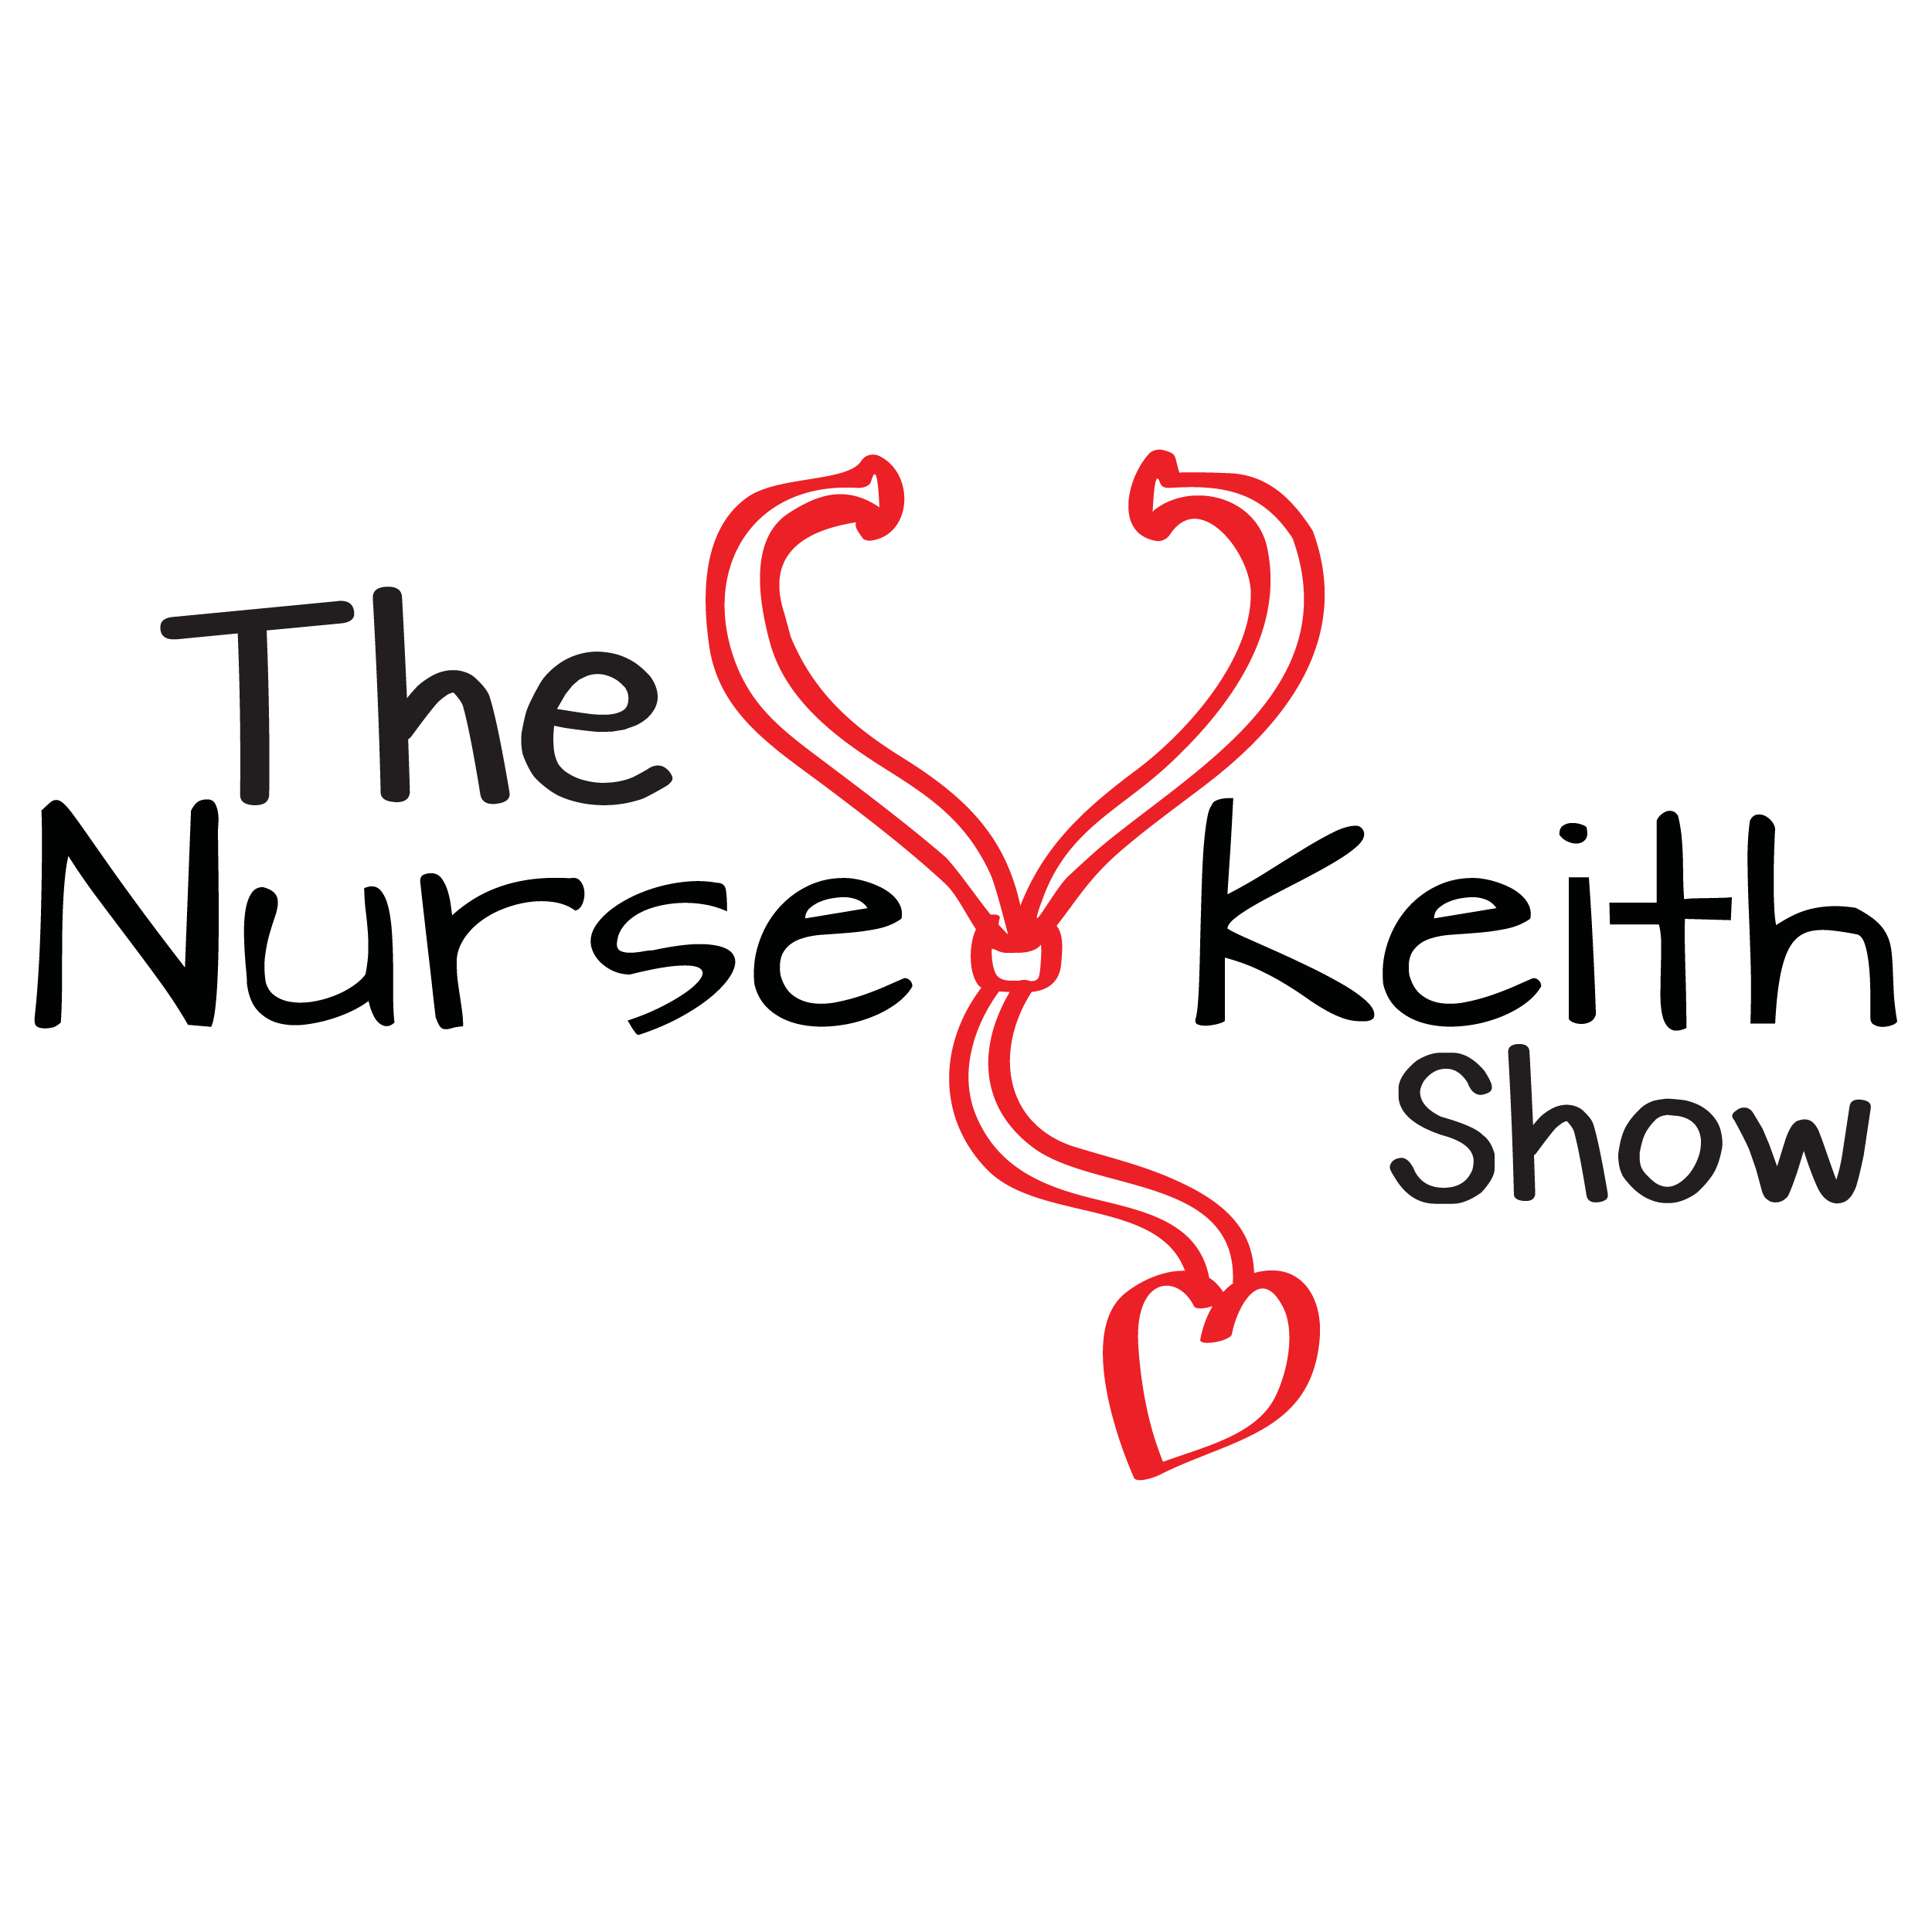 You've Been Hired! Now What? The Nurse Keith Show, EPS 62